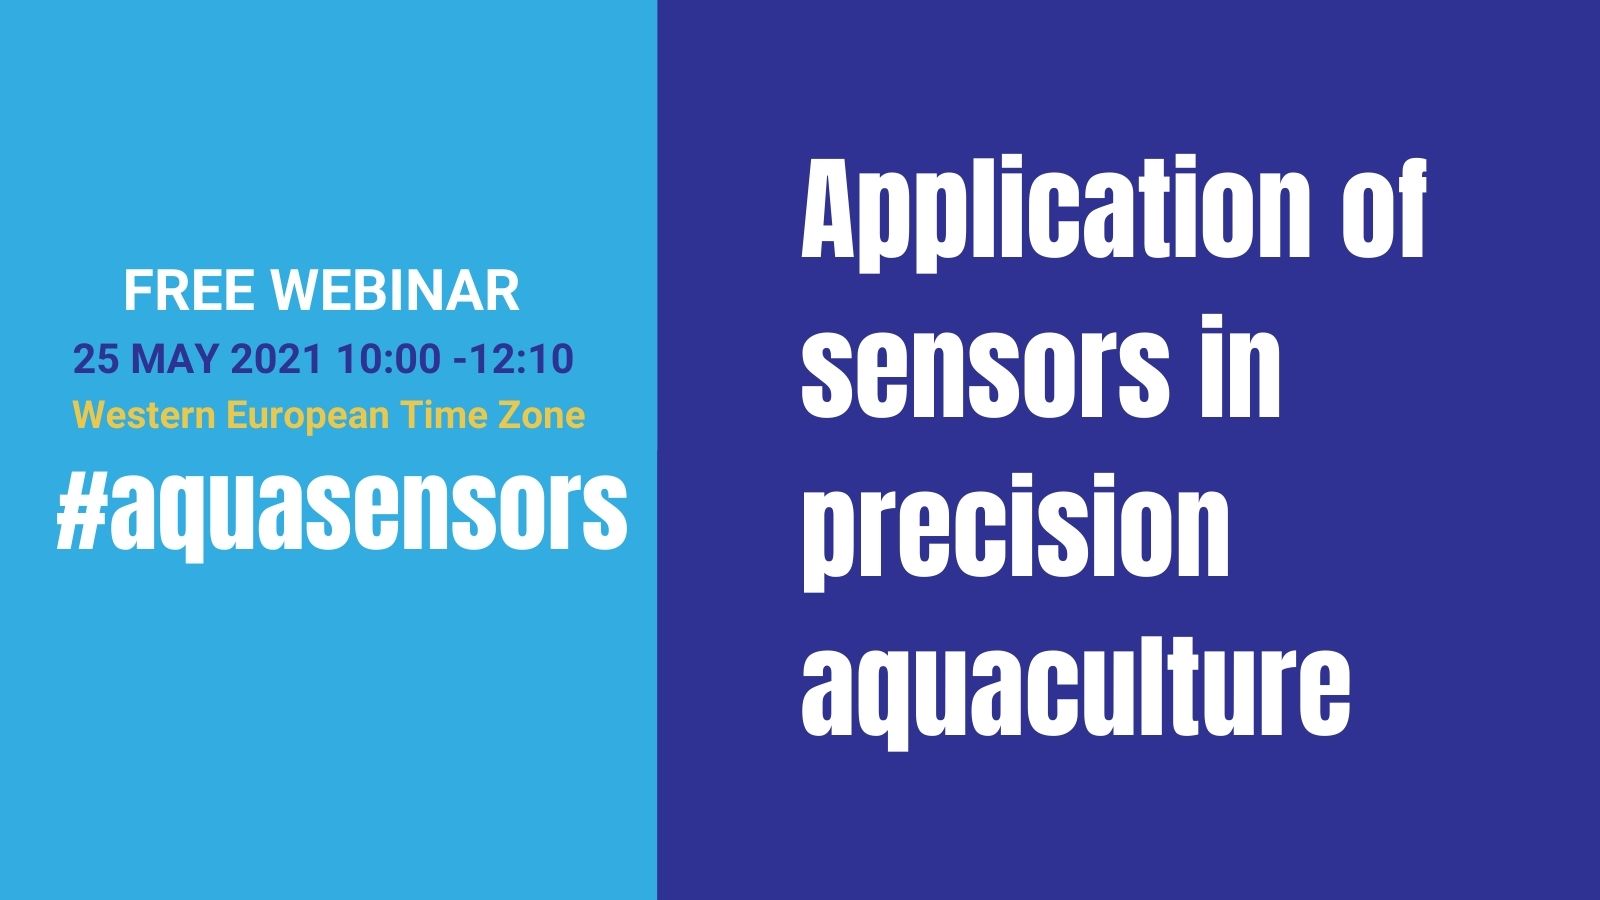 webinar banner, with picture from aquaculture room at the Centre for sustainable aquatic research, information about the webinar: title, data, and time.Application of Sensors in Precision Aquaculture, 25 May 2021 10:00 to 12:10